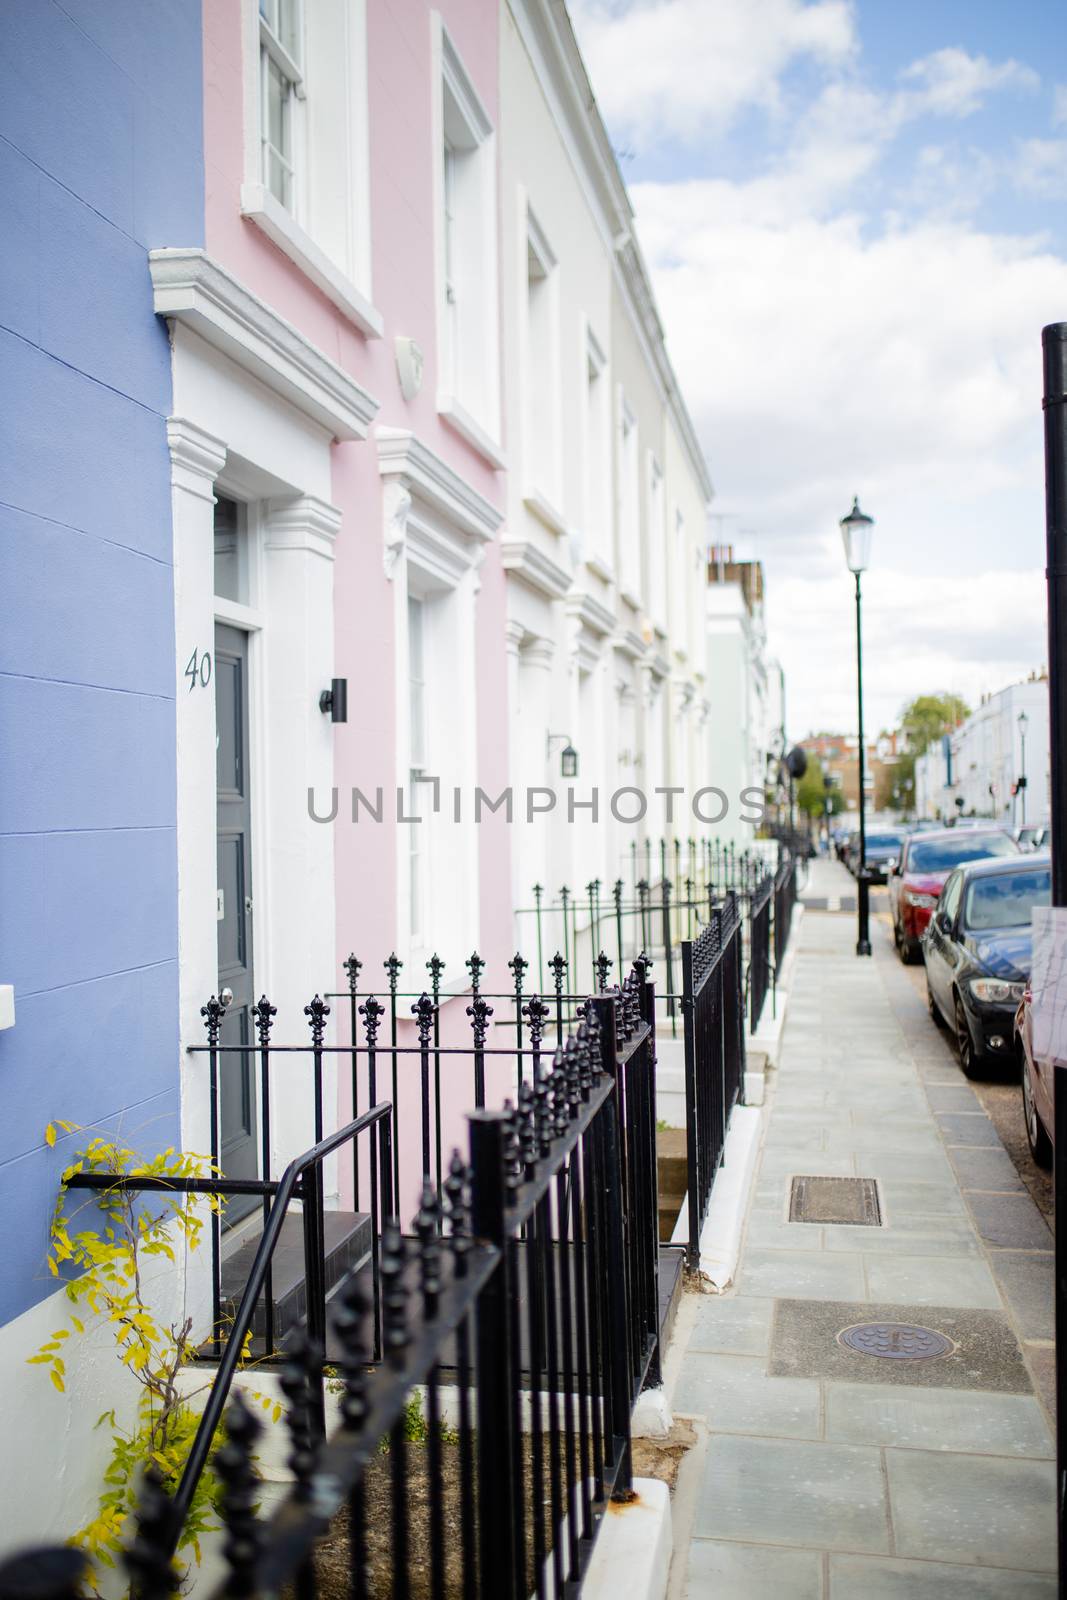 Portrait style picture of a neighbourhood from London with colorful houses and cars parked outside